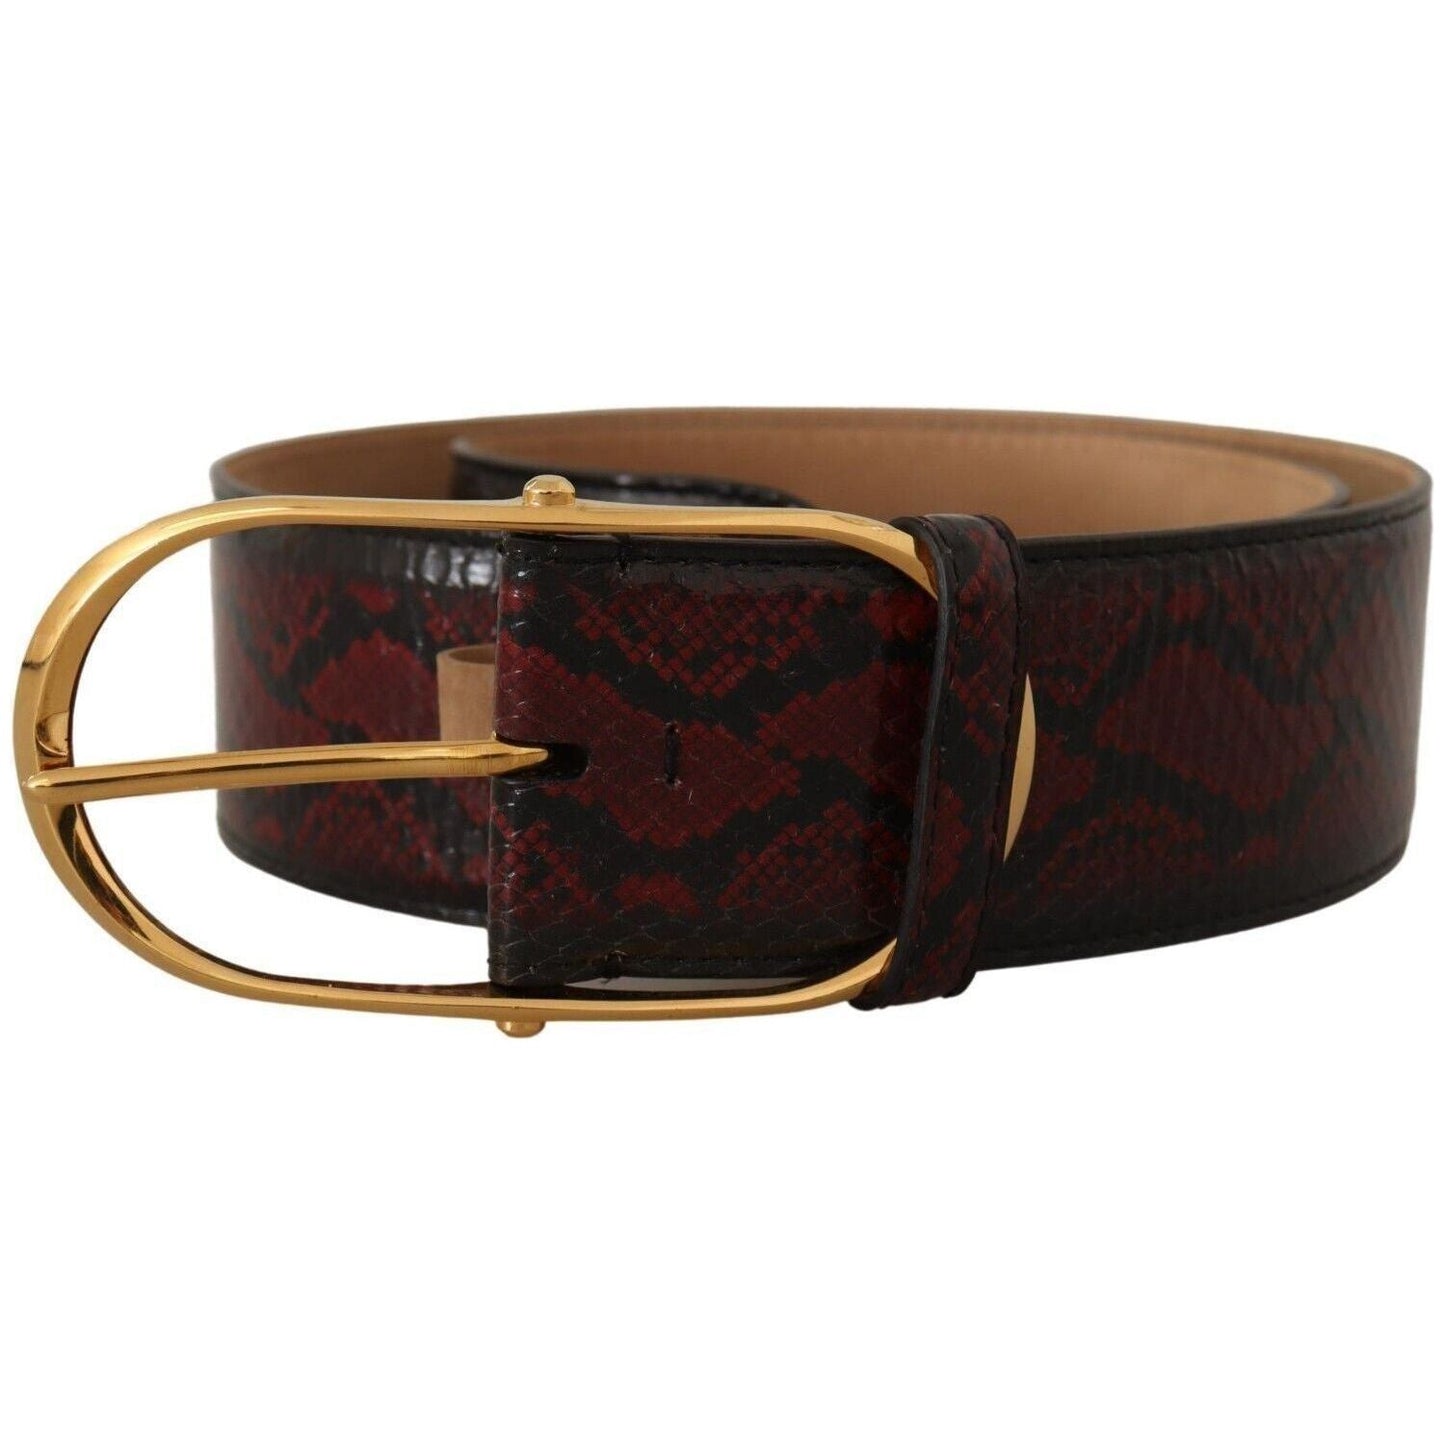 Dolce & Gabbana Elegant Red Python Leather Belt with Gold Buckle WOMAN BELTS red-exotic-leather-gold-oval-buckle-belt s-l1600-2-258-dd23b2a7-3e6.jpg